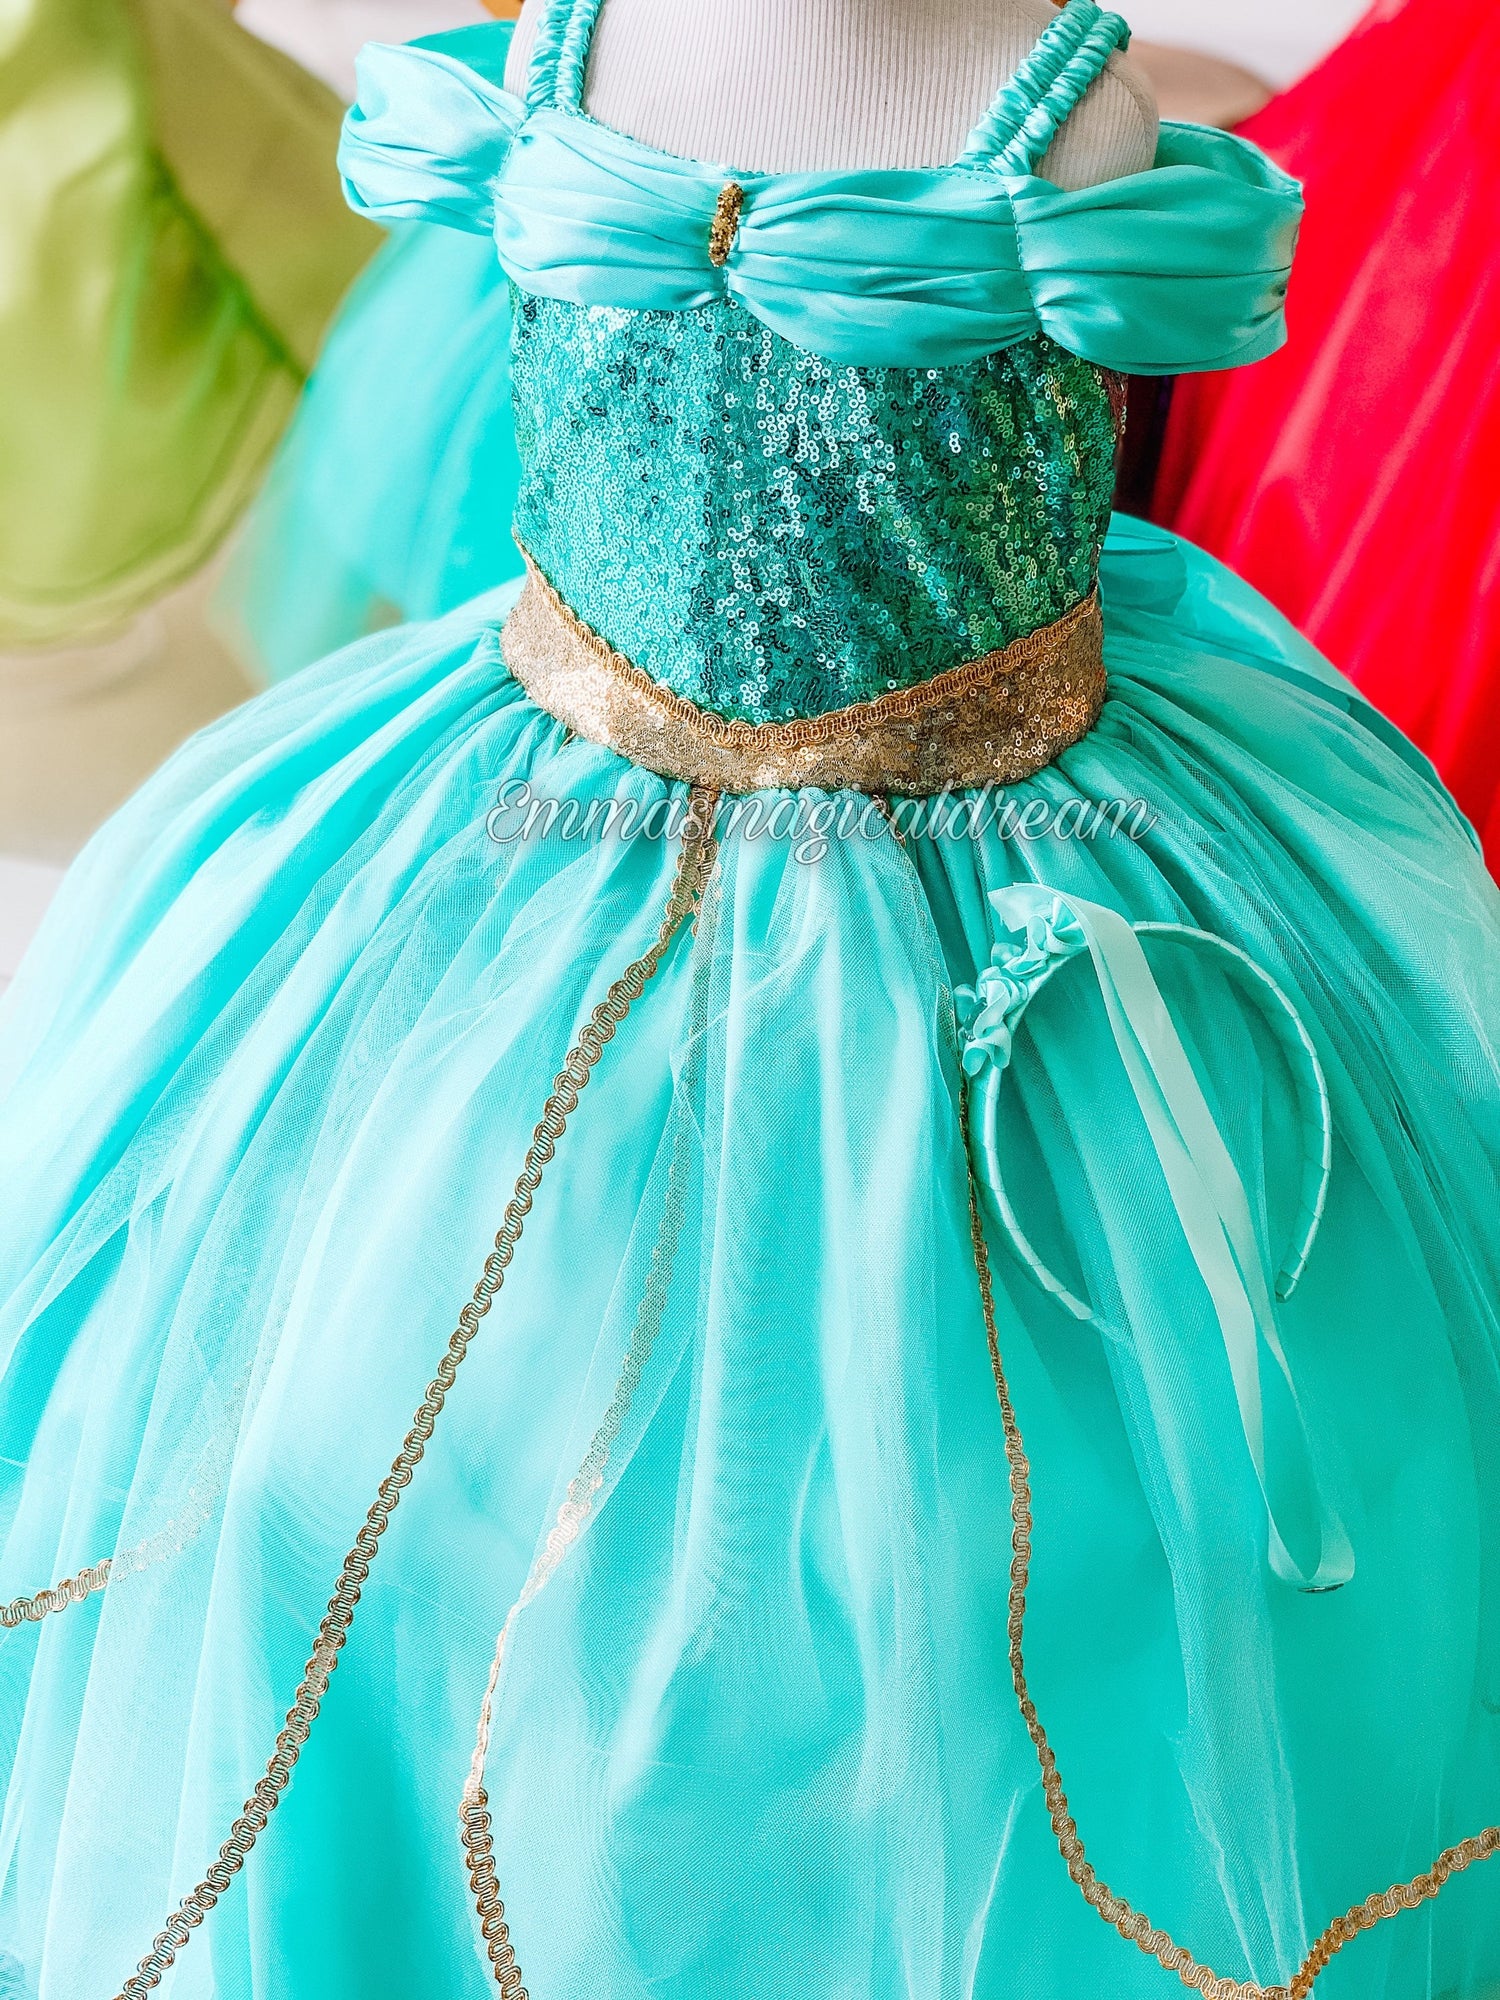 Emma's Magical Dream, Teal dress with tulle, gold accents, and sequin detailed body. Pictured with a headband, off the shoulder sleeves, and spaghetti straps to hold the dress up.  